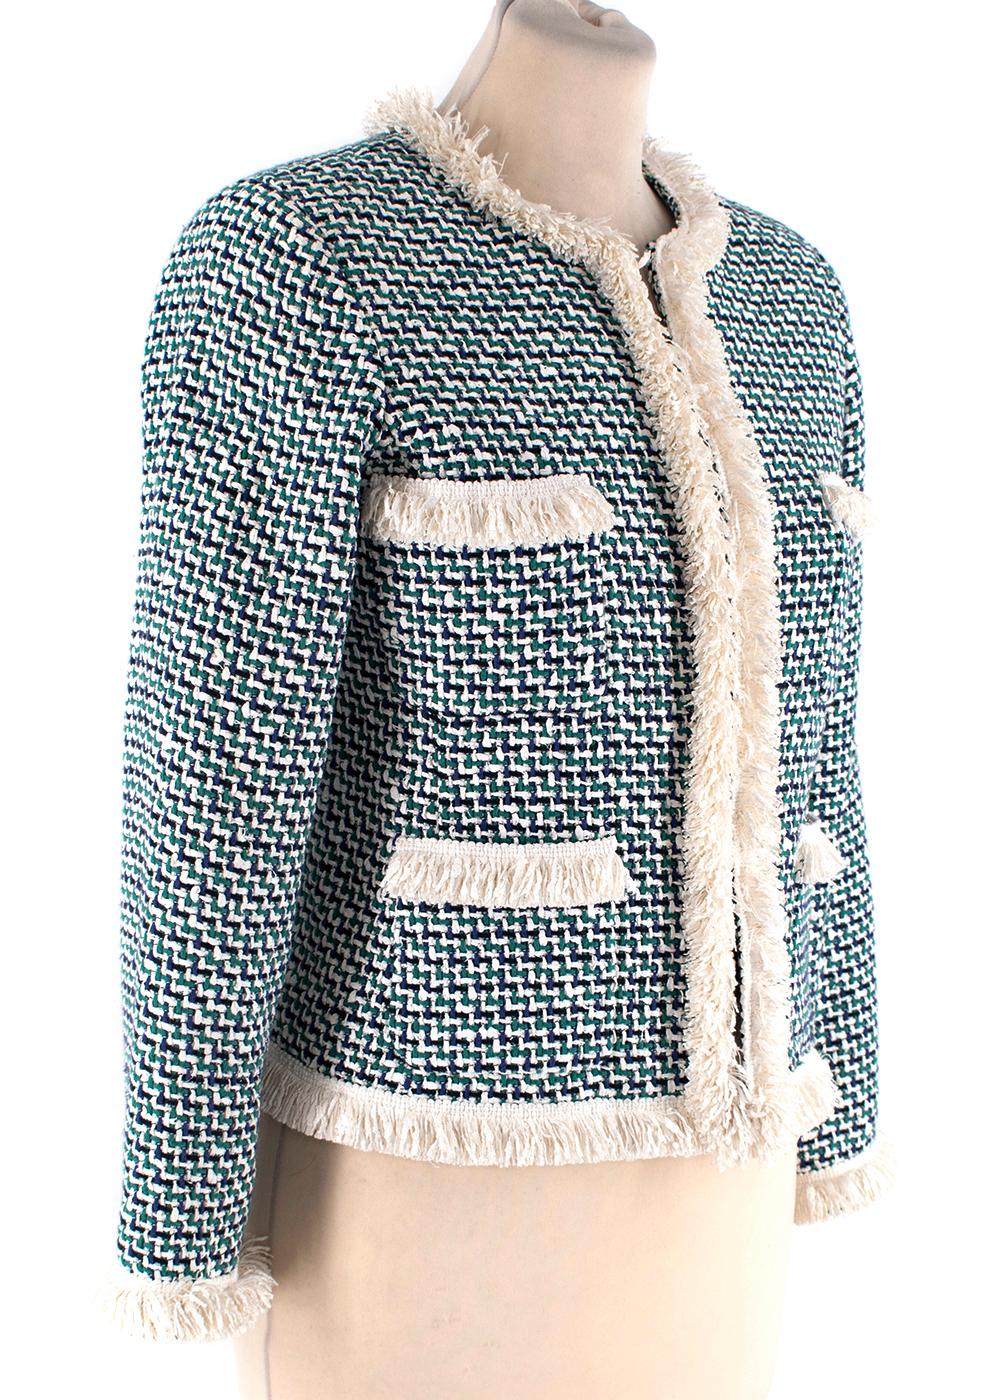 Carolina Herrera Green, Navy & Ivory Woven Raffia Jacket

- Tri-colour woven jacket in green, navy, and ivory 
- Raffia ivory trim
- Round neckline, hook&eye front closure
- 4 front patch pockets
- Padded shoulders 
- Fully